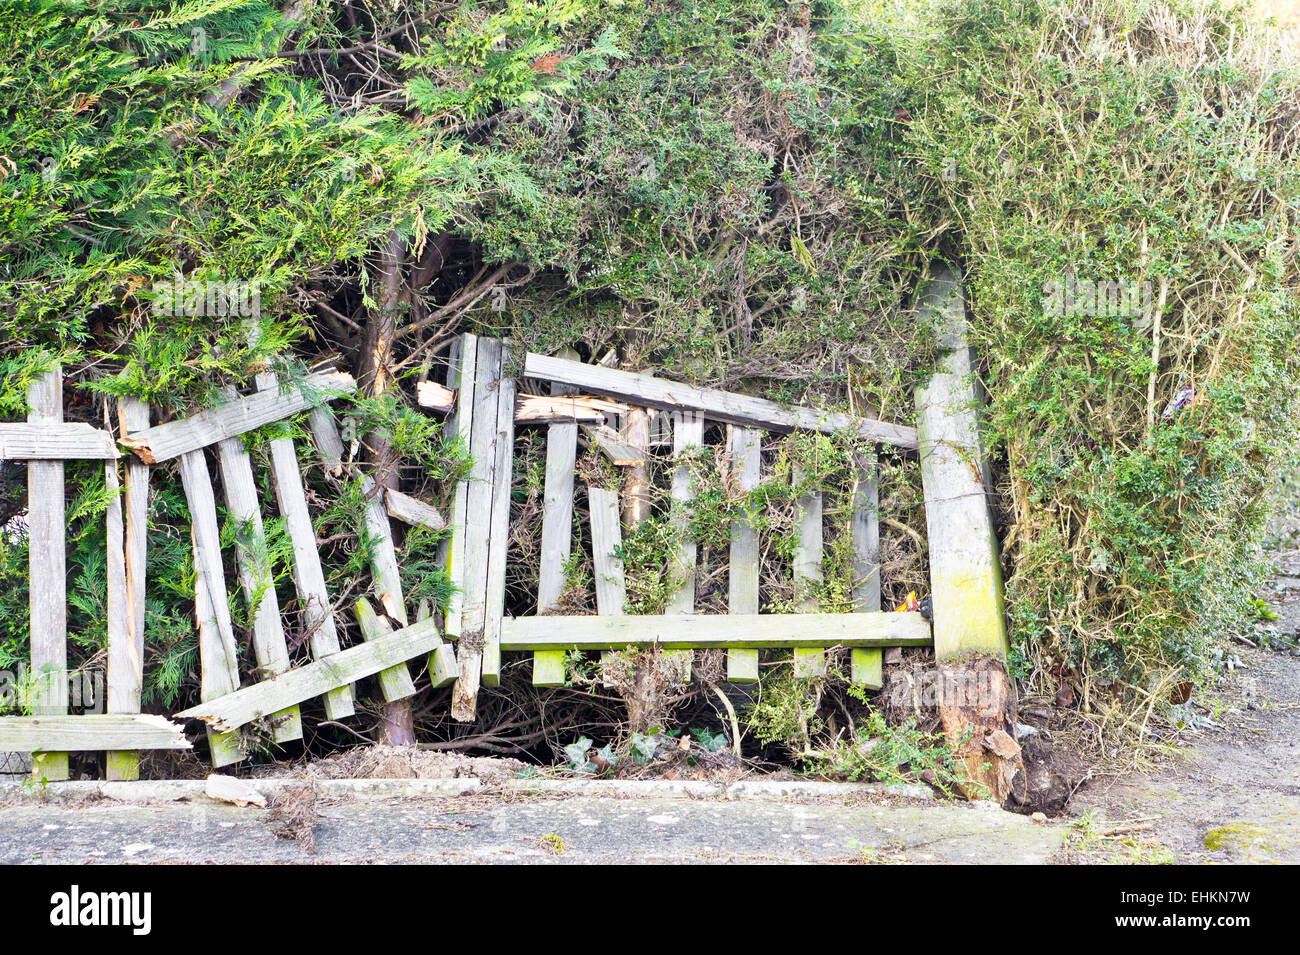 Part of a badly damaged wooden picket fence Stock Photo